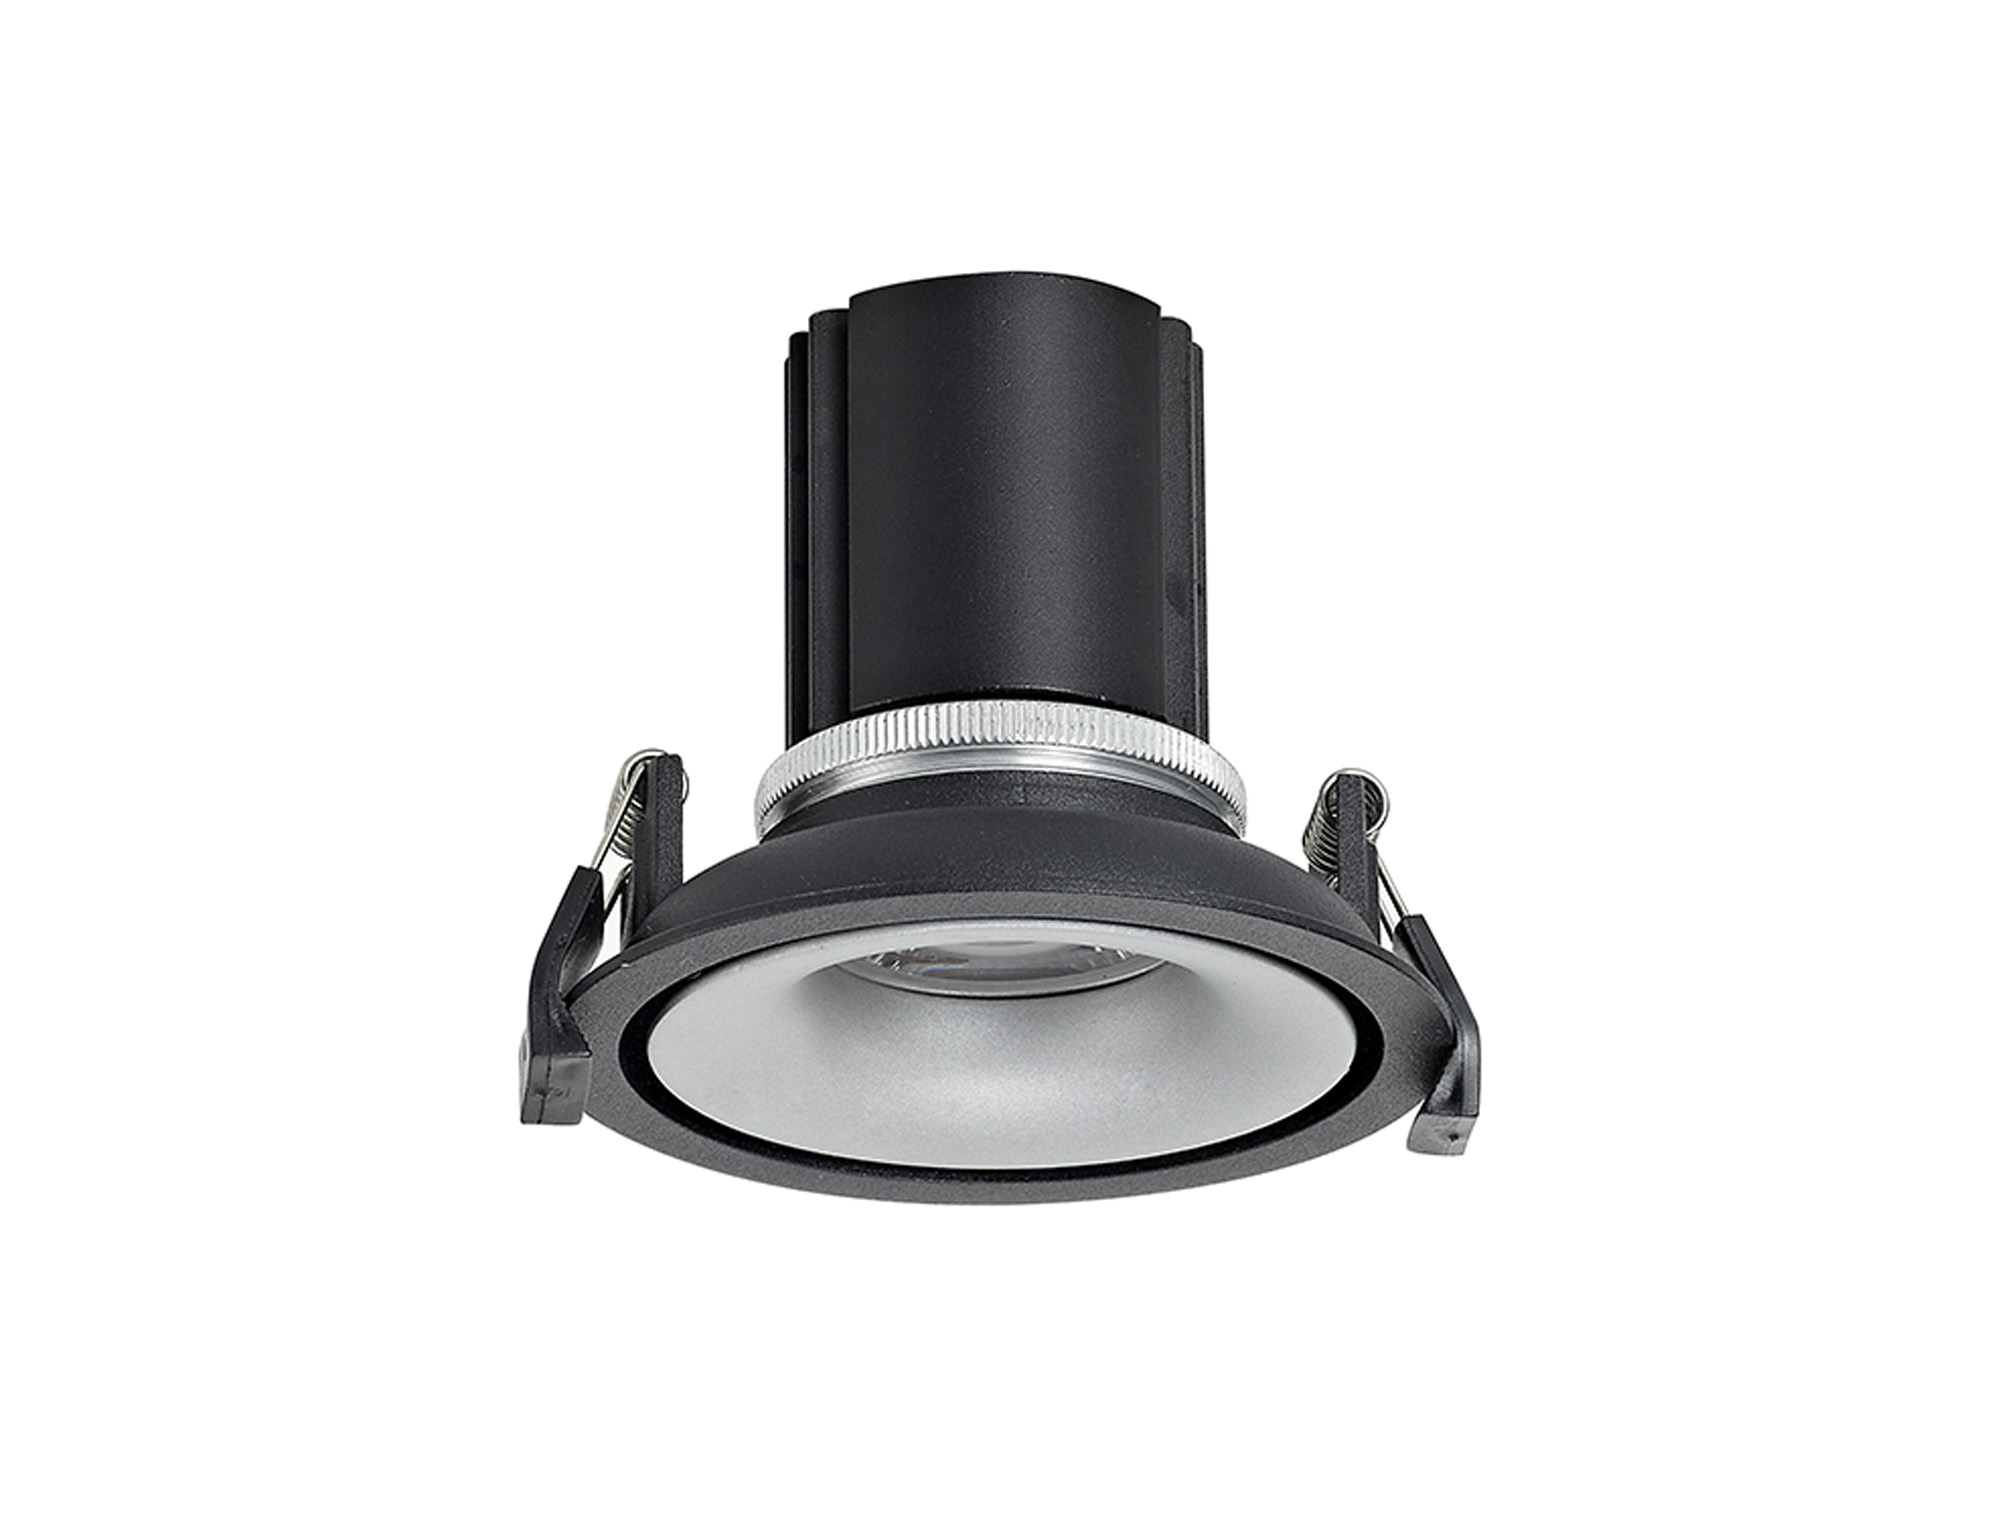 DM202153  Bolor 12 Tridonic Powered 12W 2700K 1200lm 12° CRI>90 LED Engine Black/Silver Fixed Recessed Spotlight, IP20